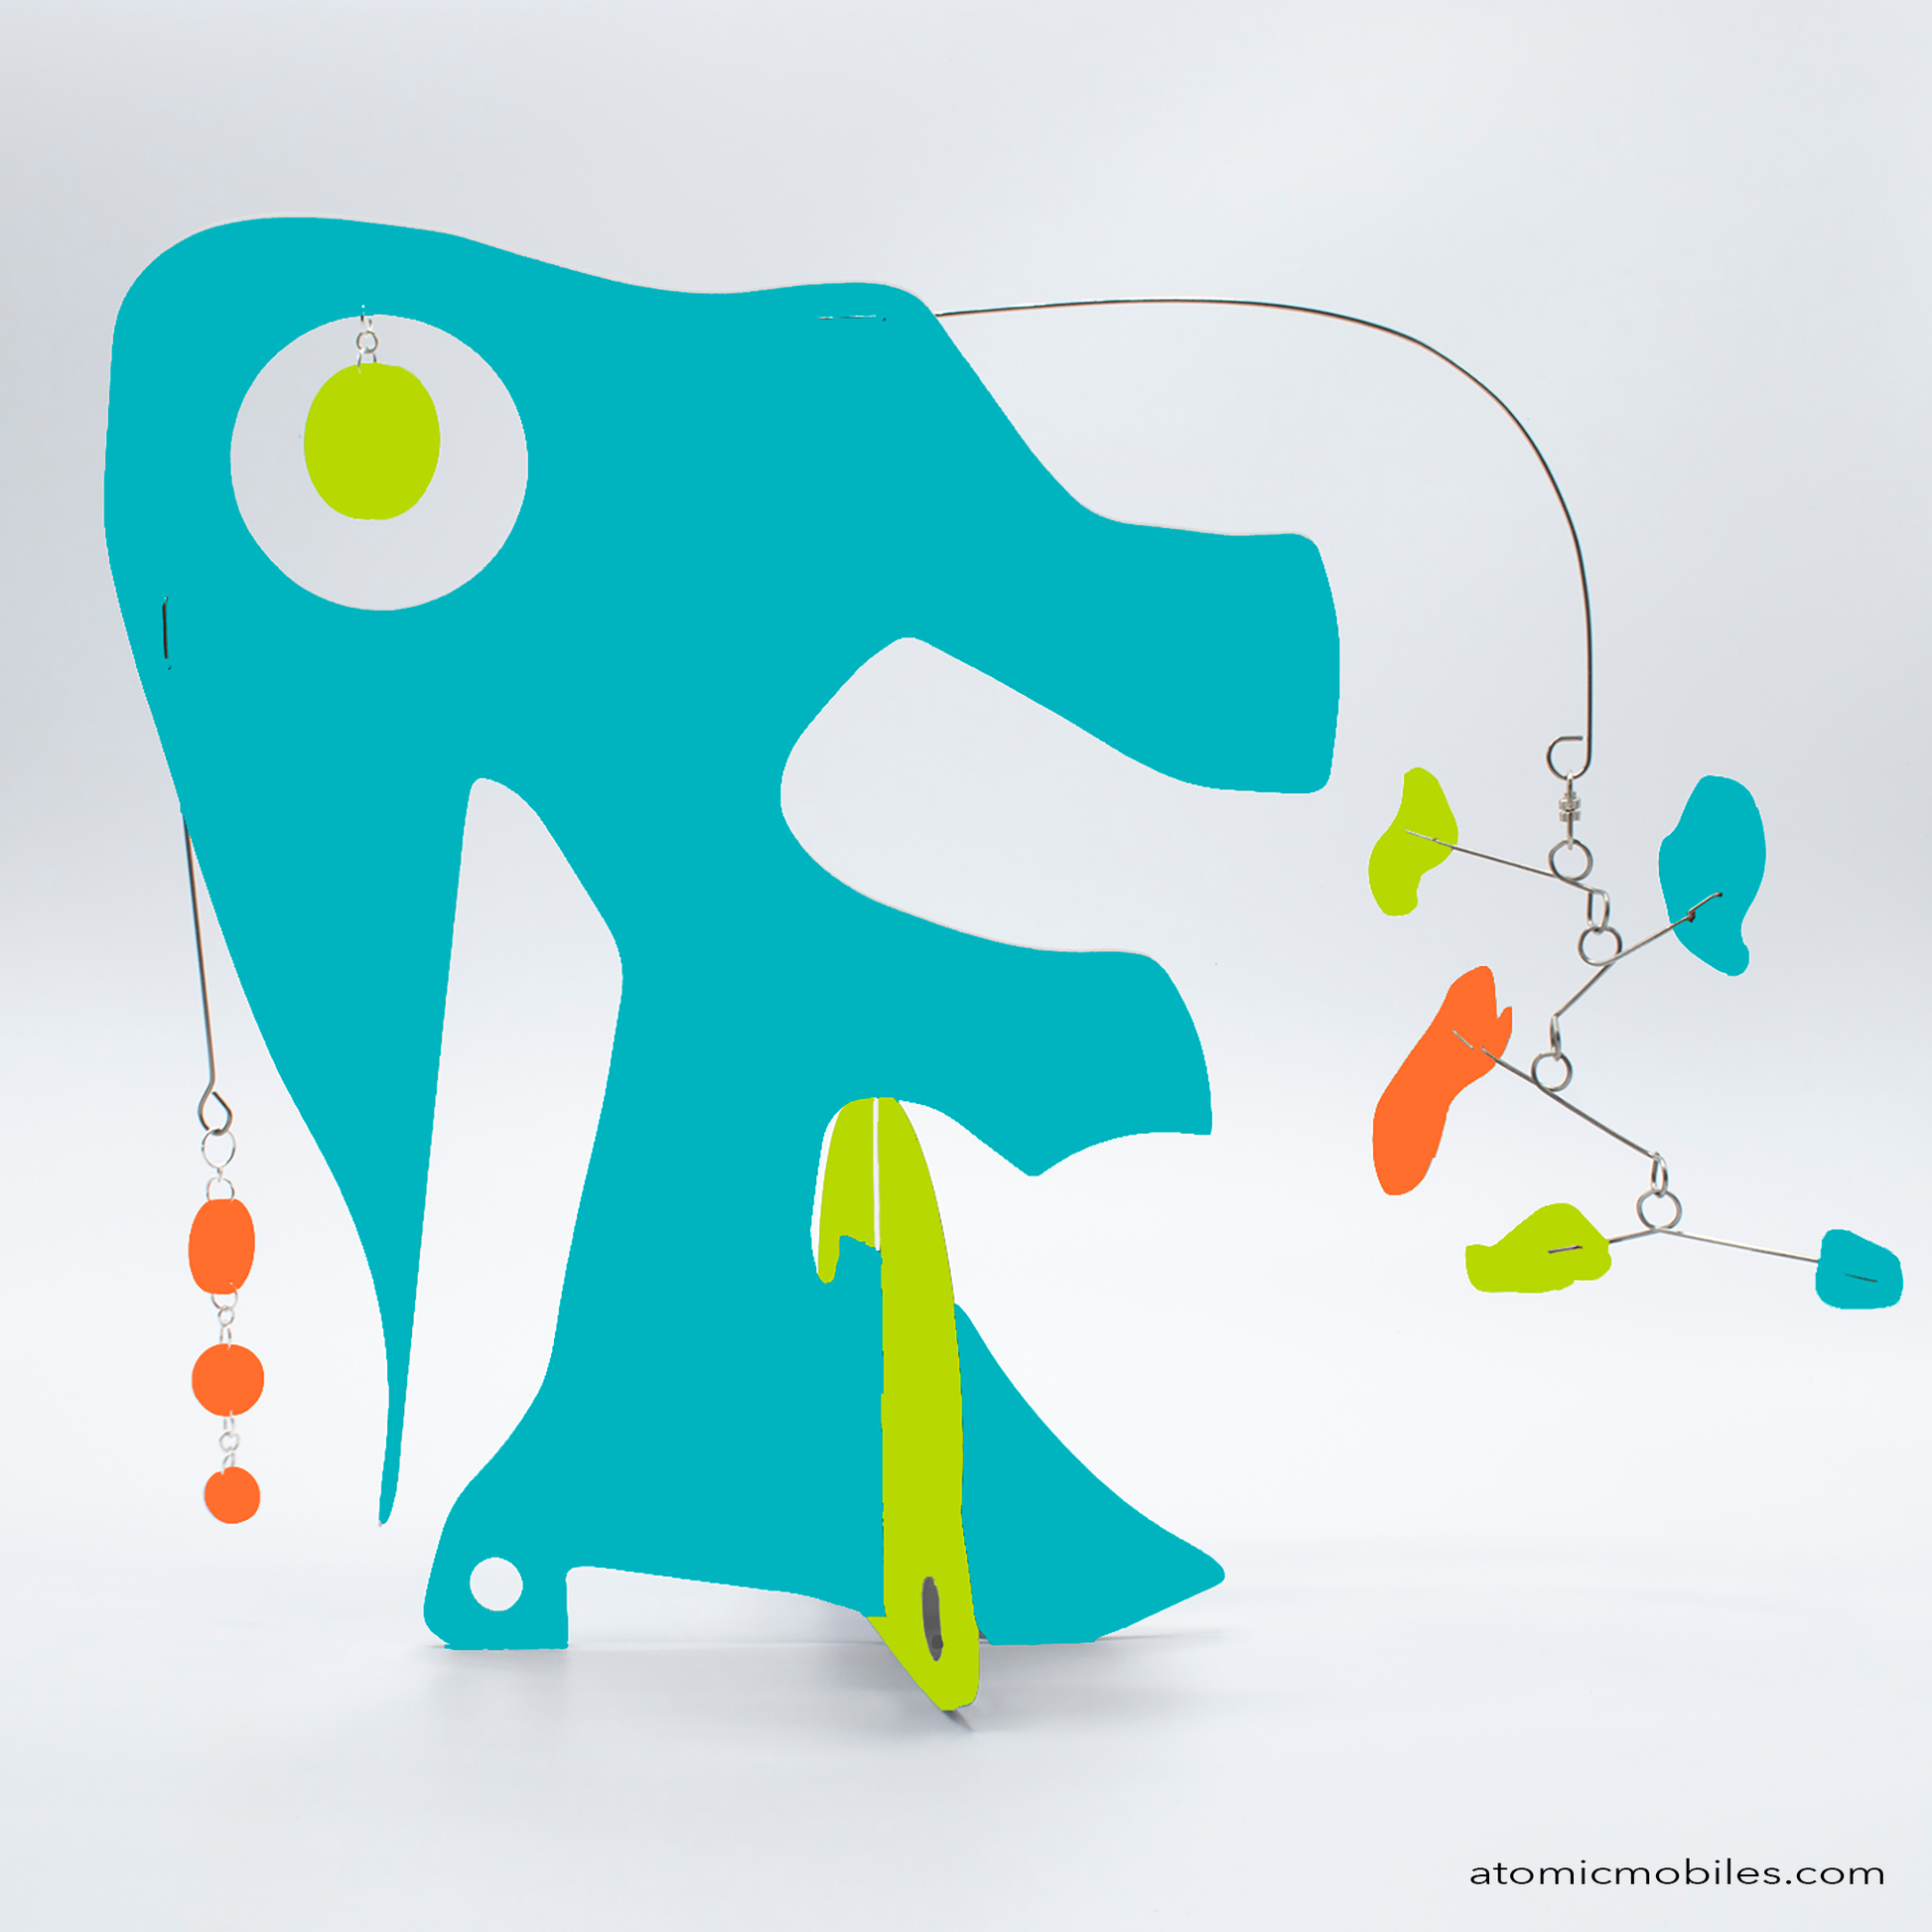 KinetiCats Collection Elephant in Aqua, Orange, and Lime Green - one of 12 Modern Cute Abstract Animal Art Sculpture Kinetic Stabiles inspired by Dada and mid century modern style art by AtomicMobiles.com